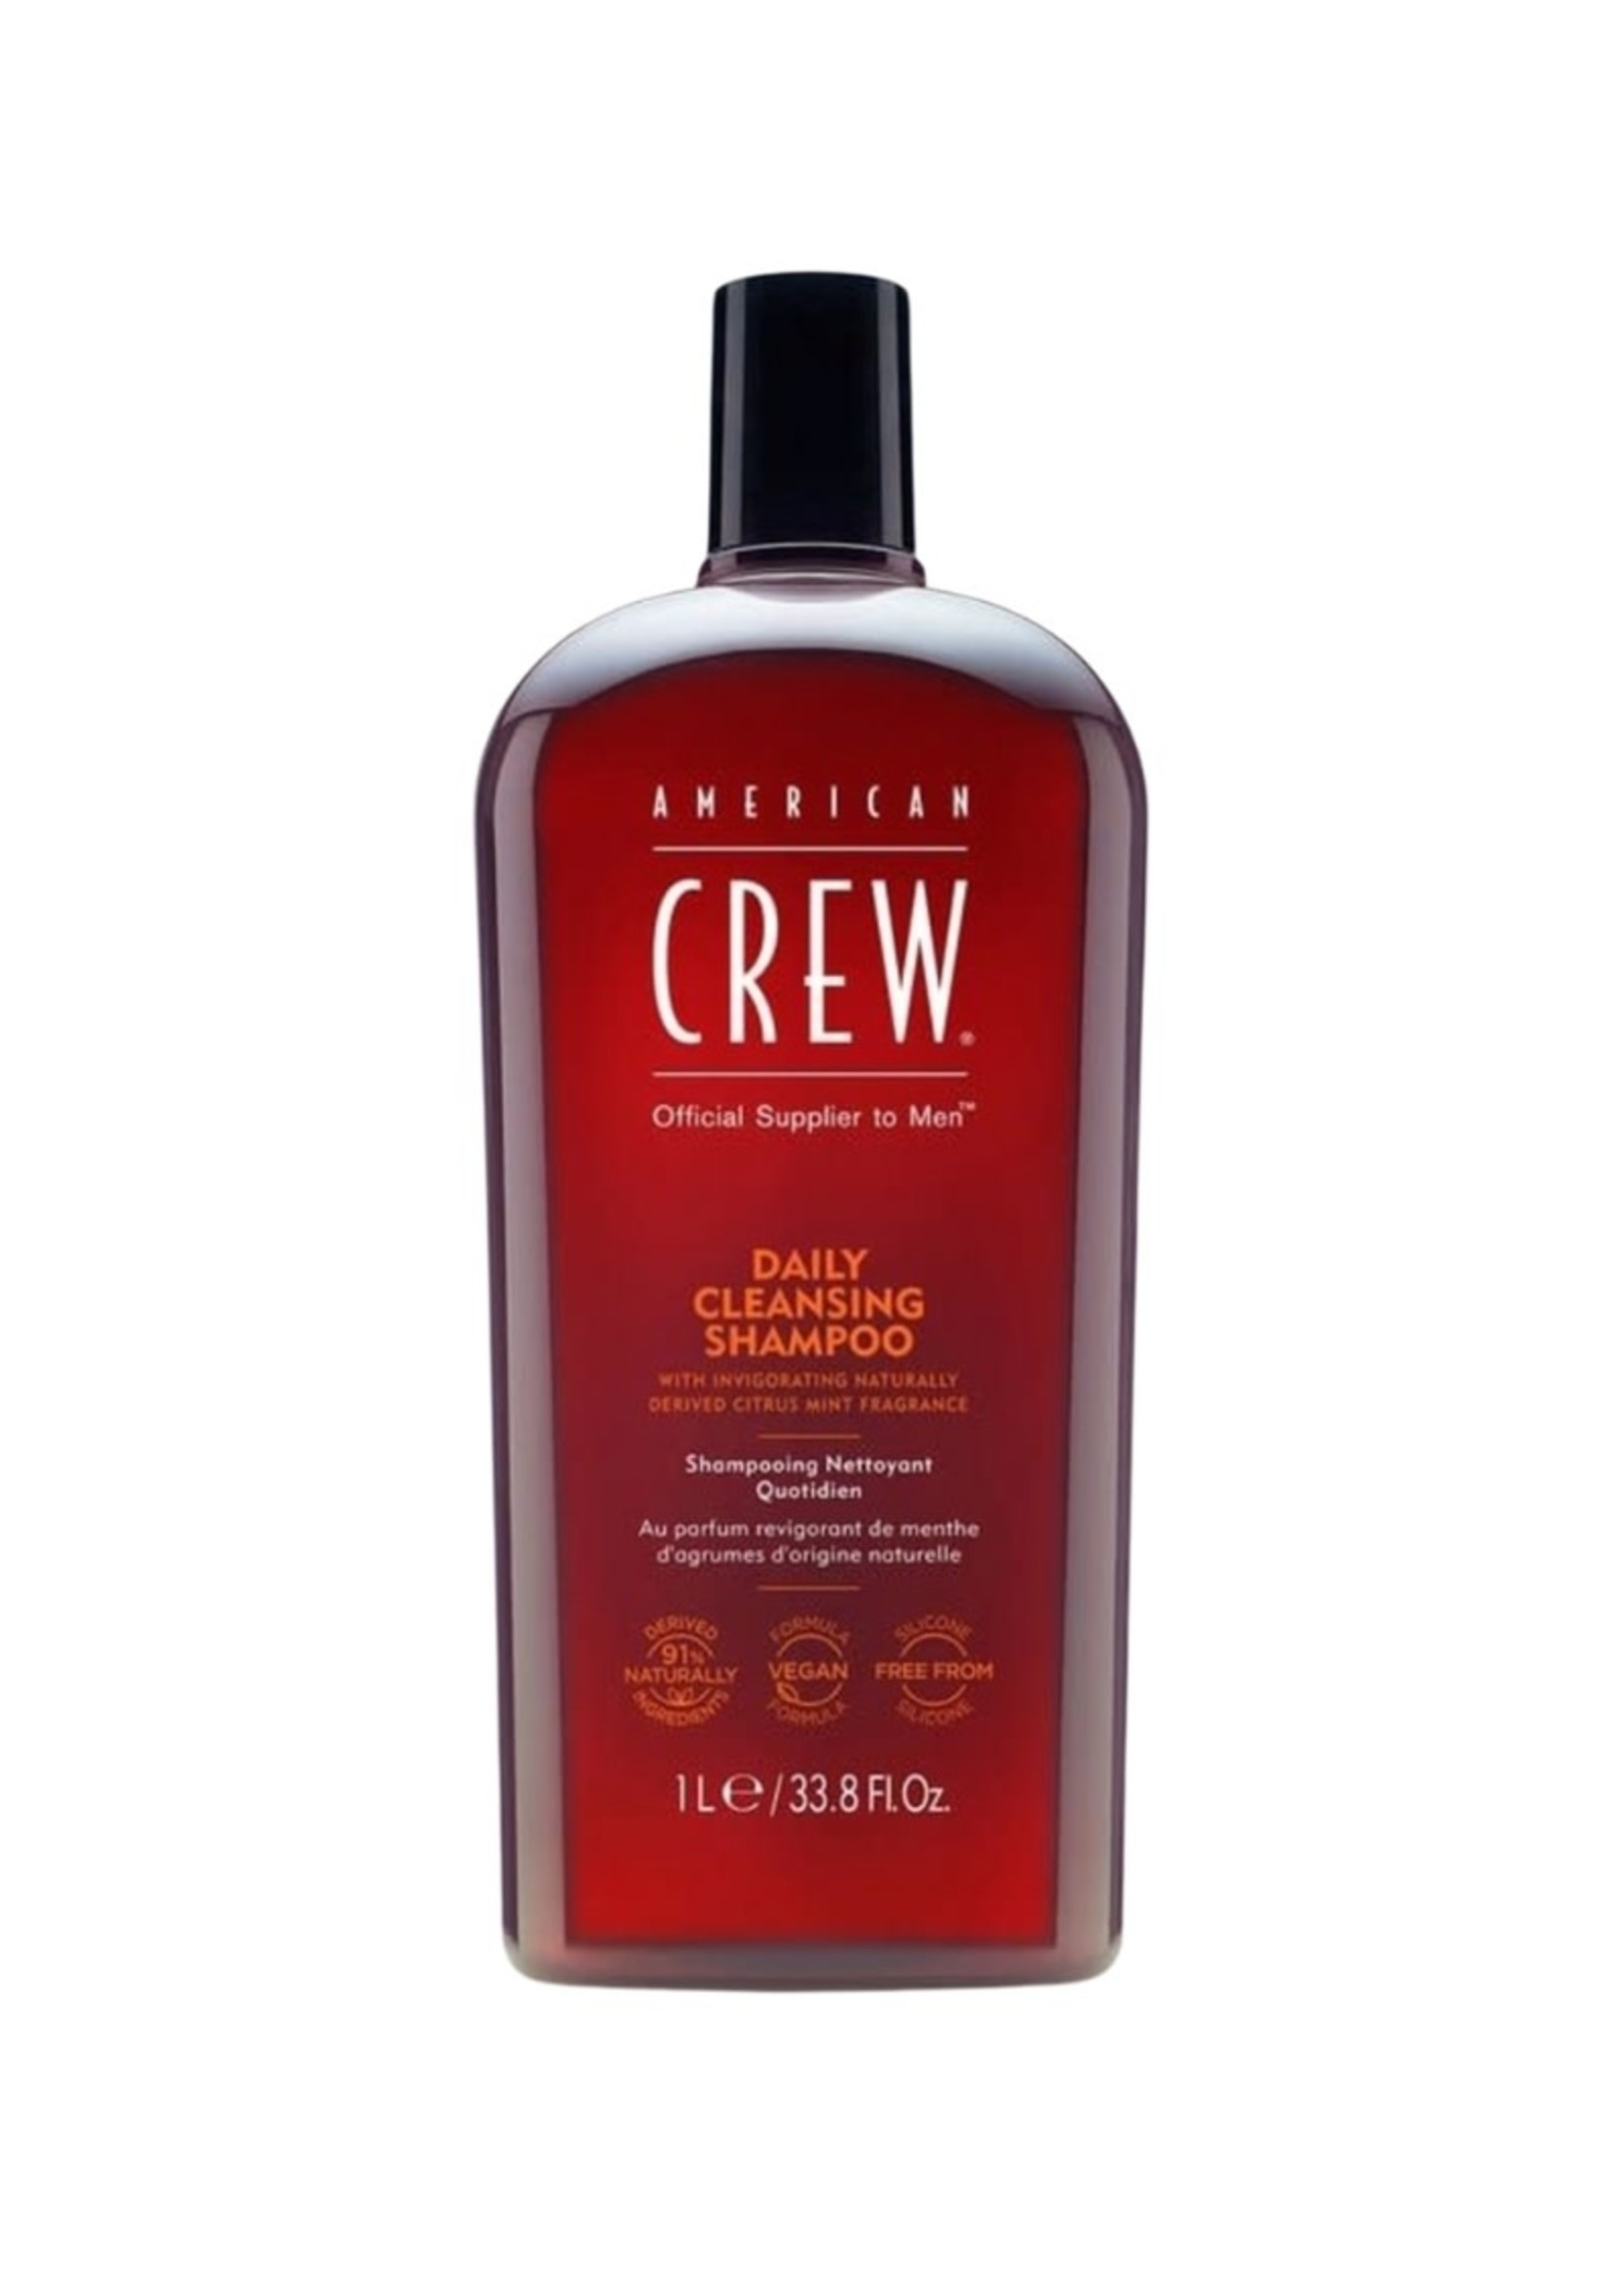 American Crew American Crew Daily Cleansing Shampoo 1L